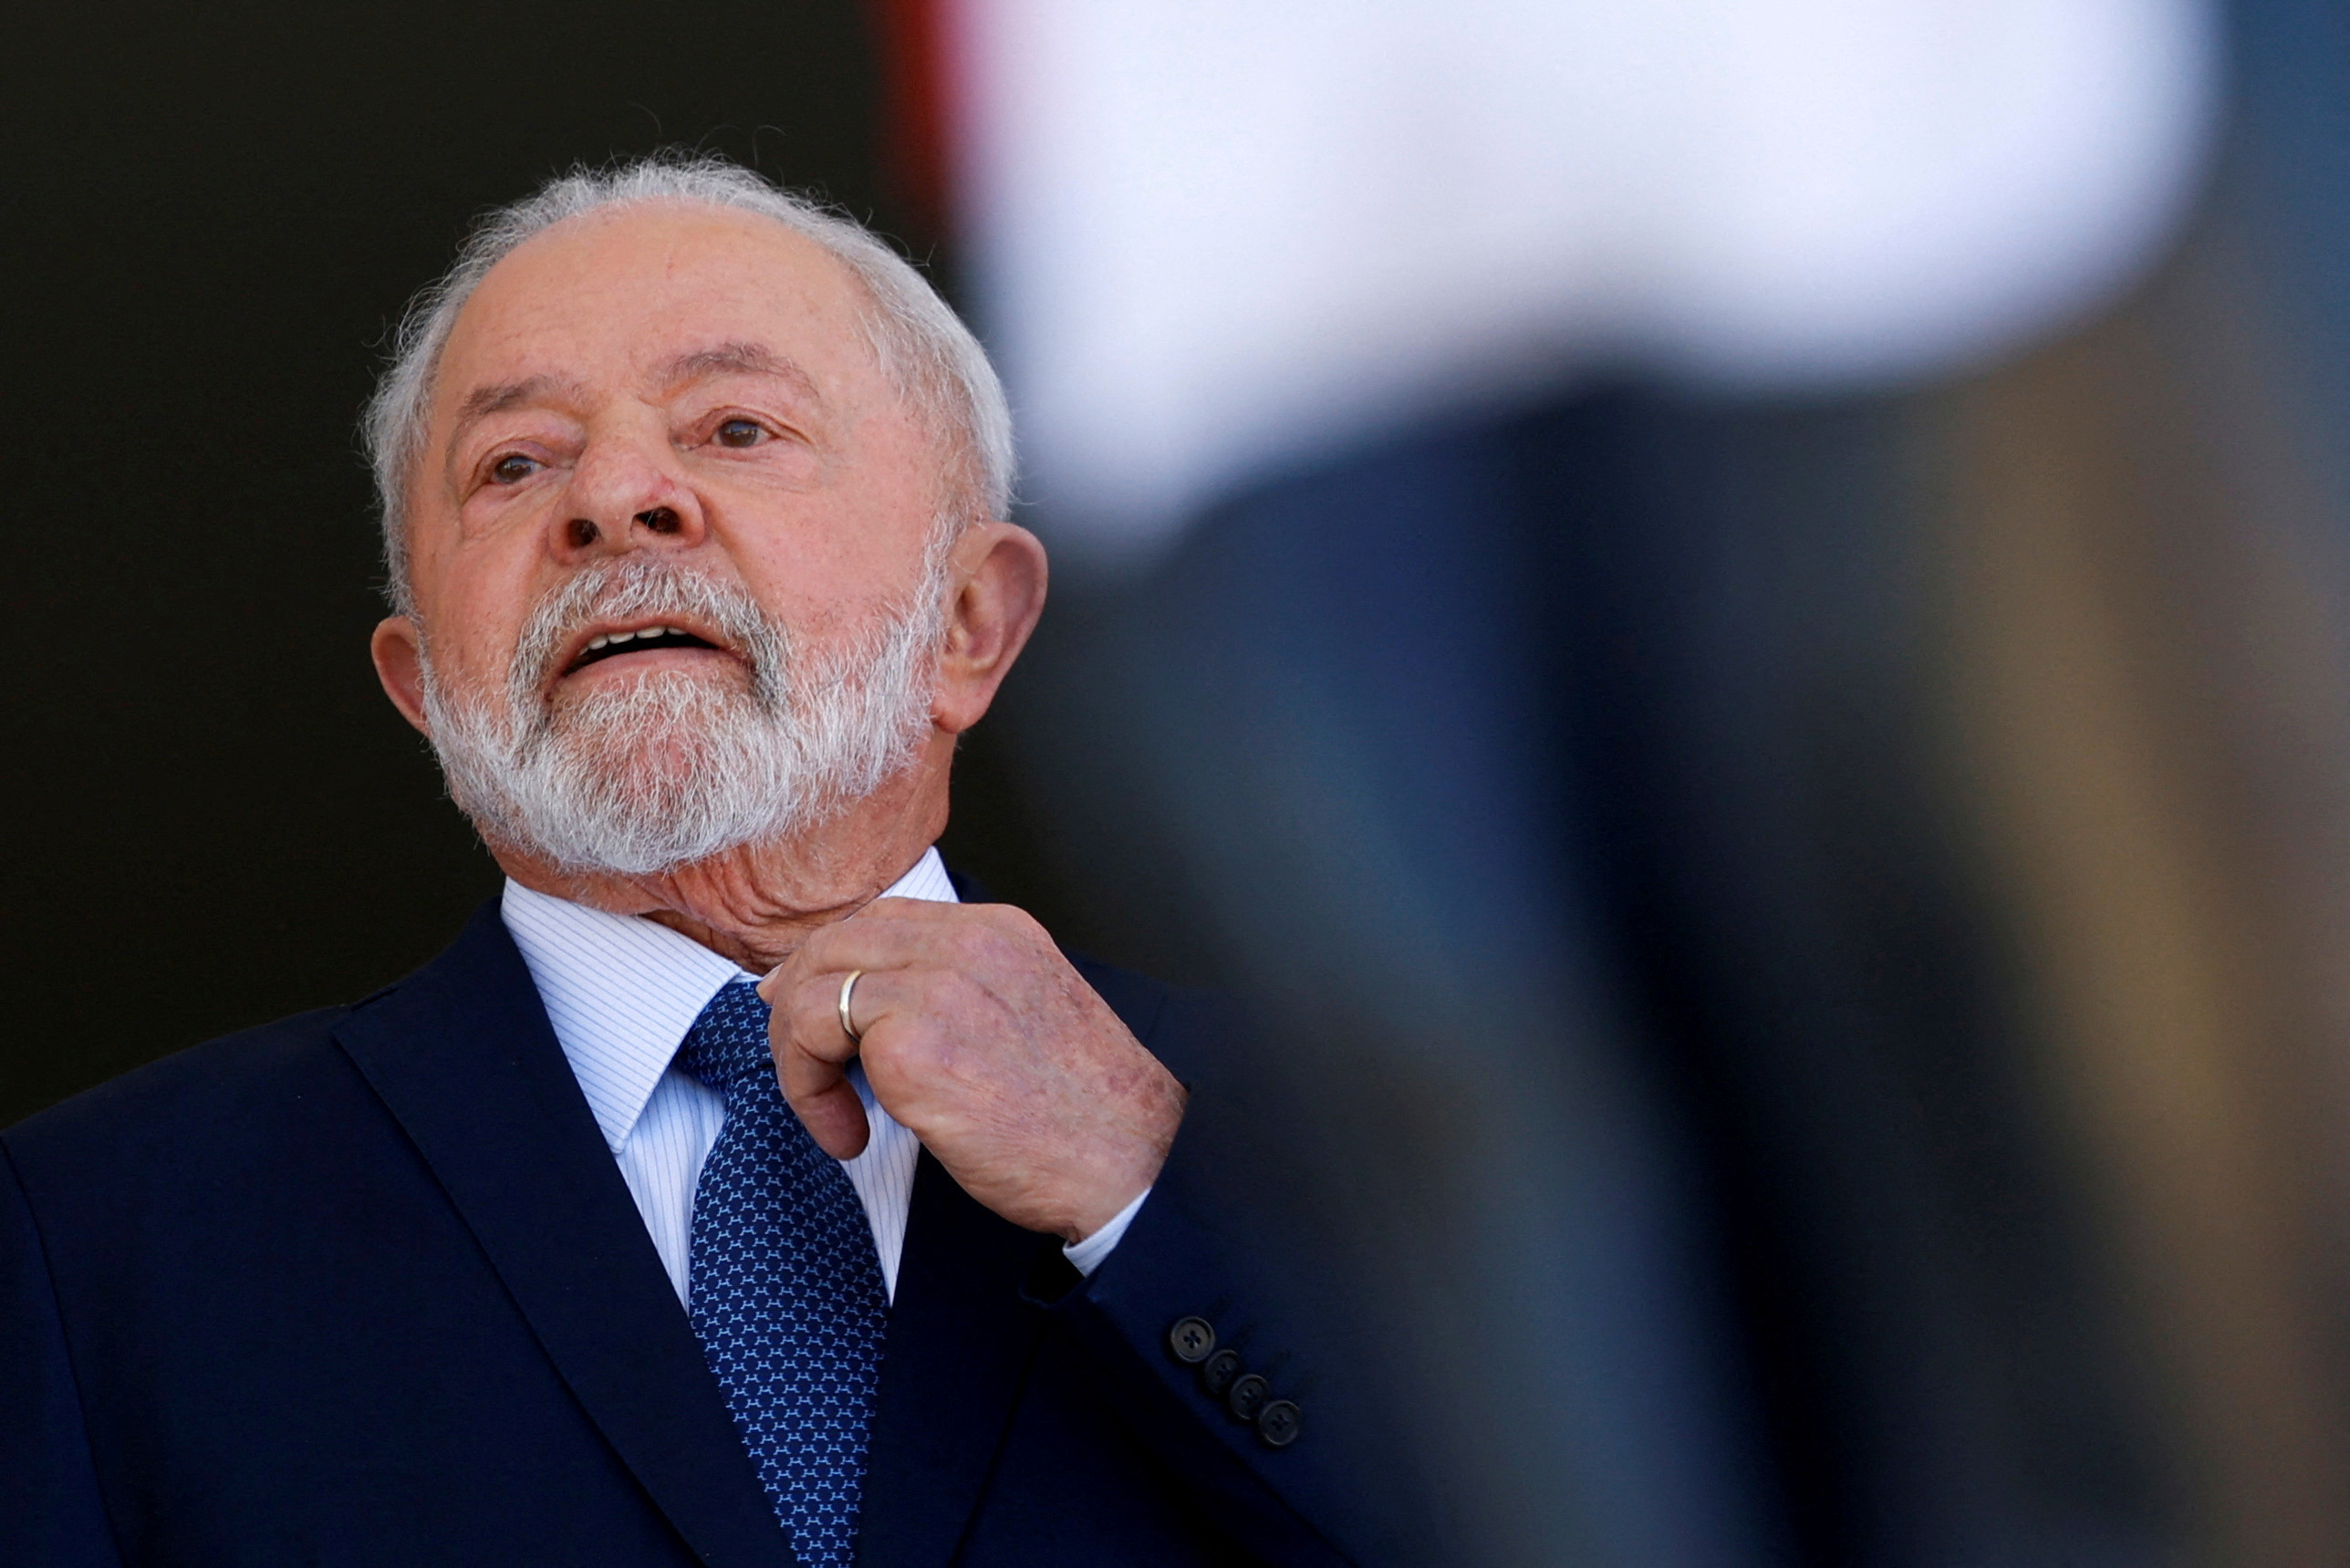 Lula Urges Meeting of EU-Mercosur Leaders Over Trade Deal Fate - Bloomberg